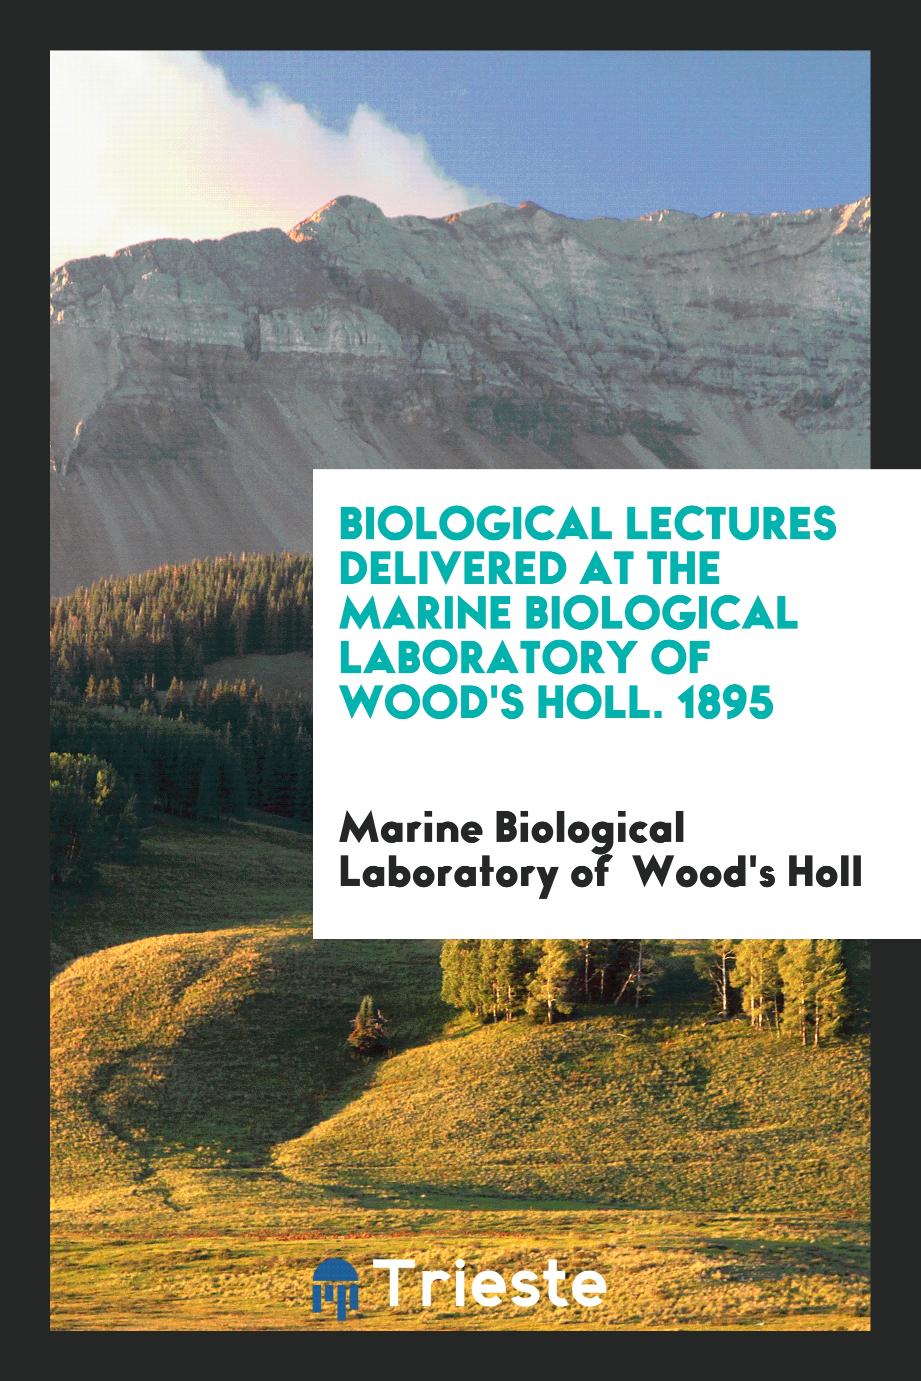 Biological Lectures Delivered at the Marine Biological Laboratory of Wood's Holl. 1895